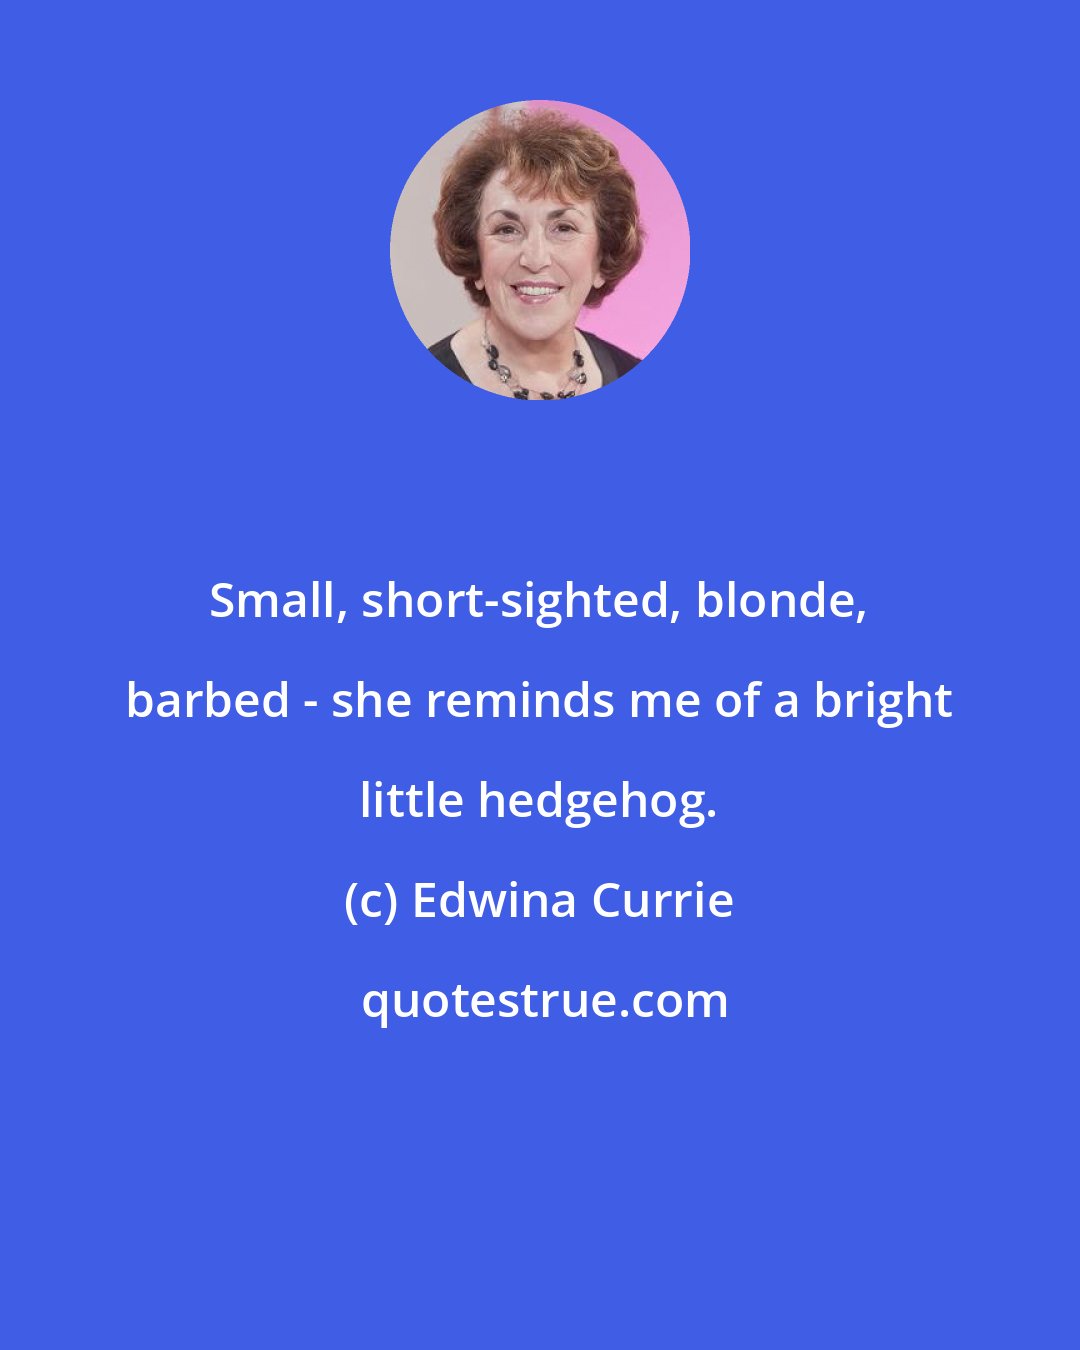 Edwina Currie: Small, short-sighted, blonde, barbed - she reminds me of a bright little hedgehog.